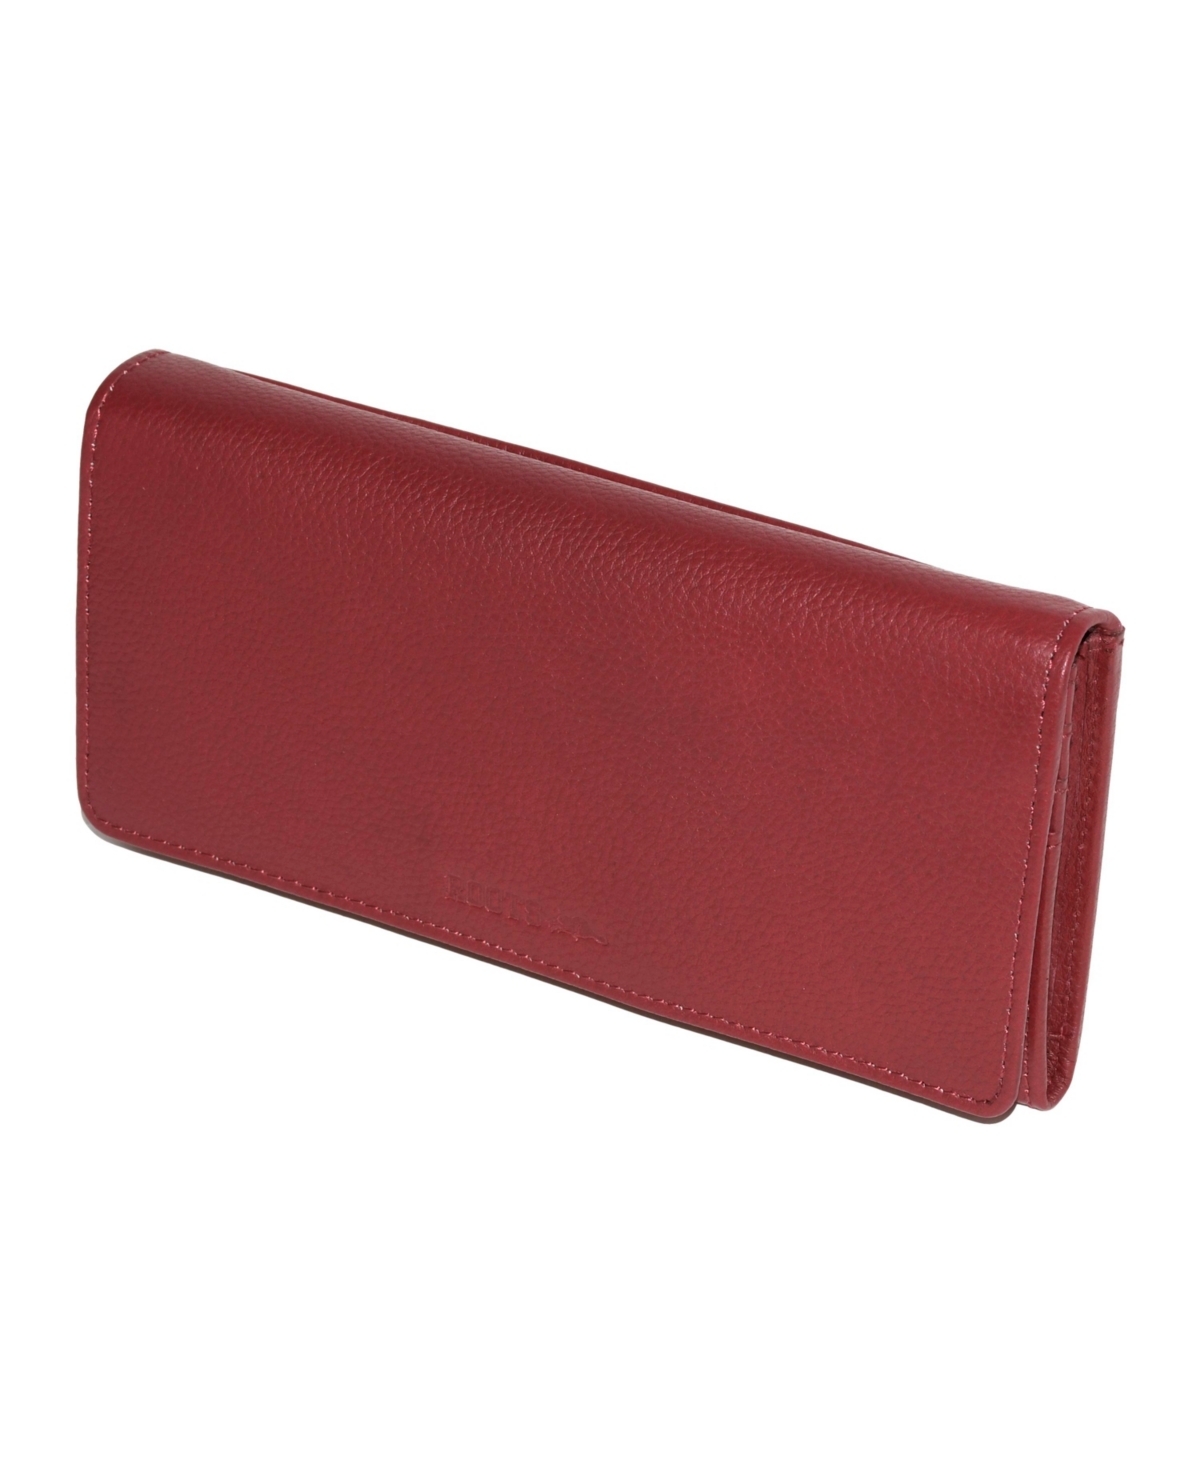 ROOTS LADIES LEATHER EXPANDER CLUTCH WALLET